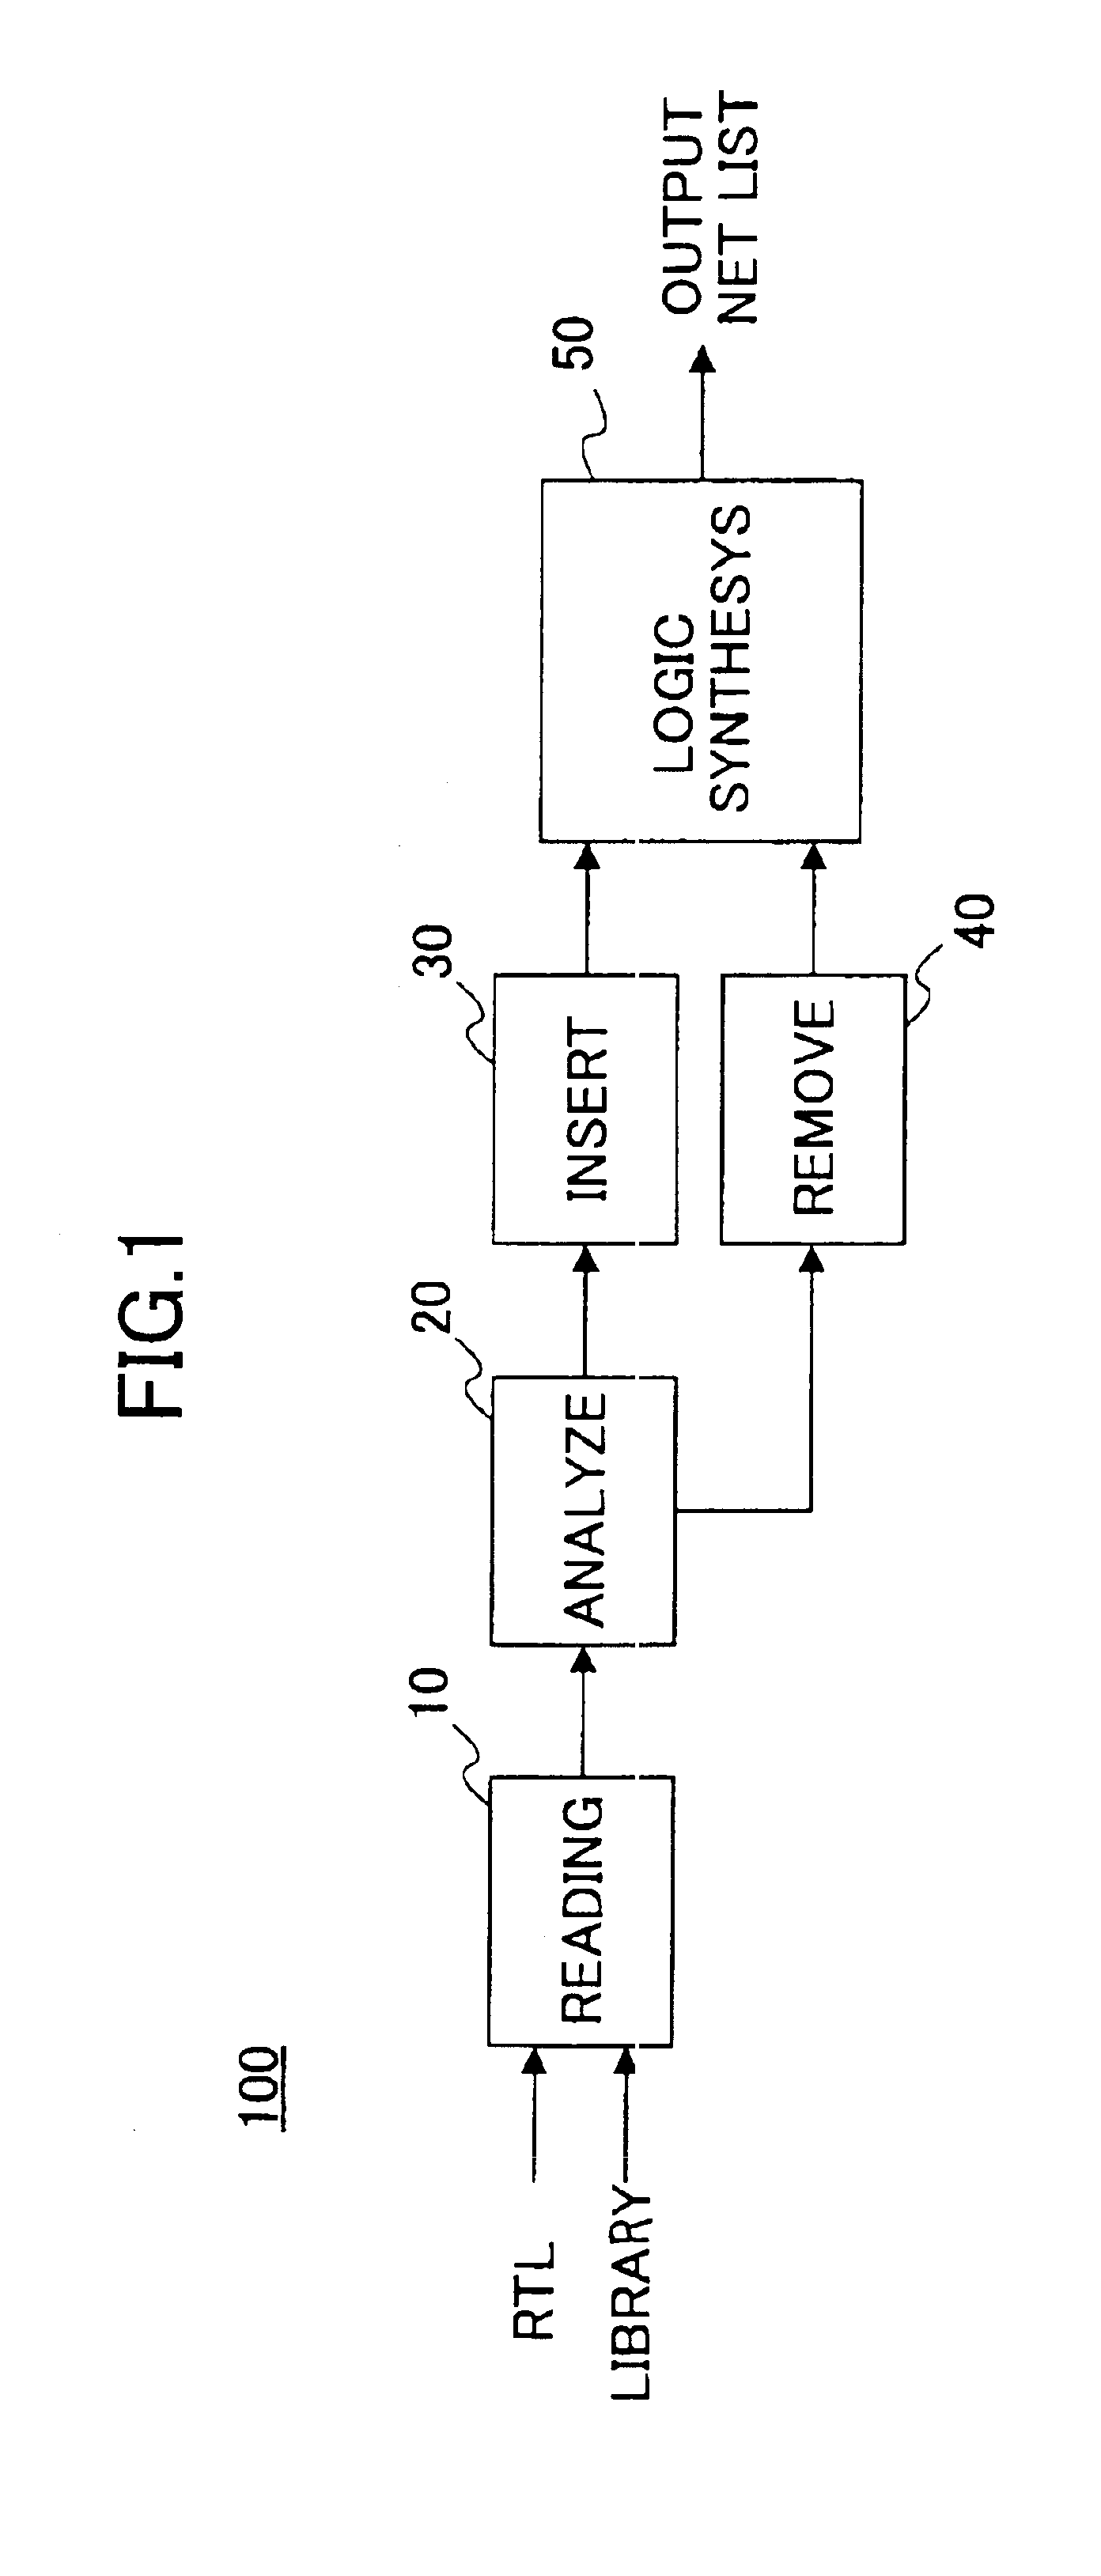 Logic synthesis device and logic synthesis method